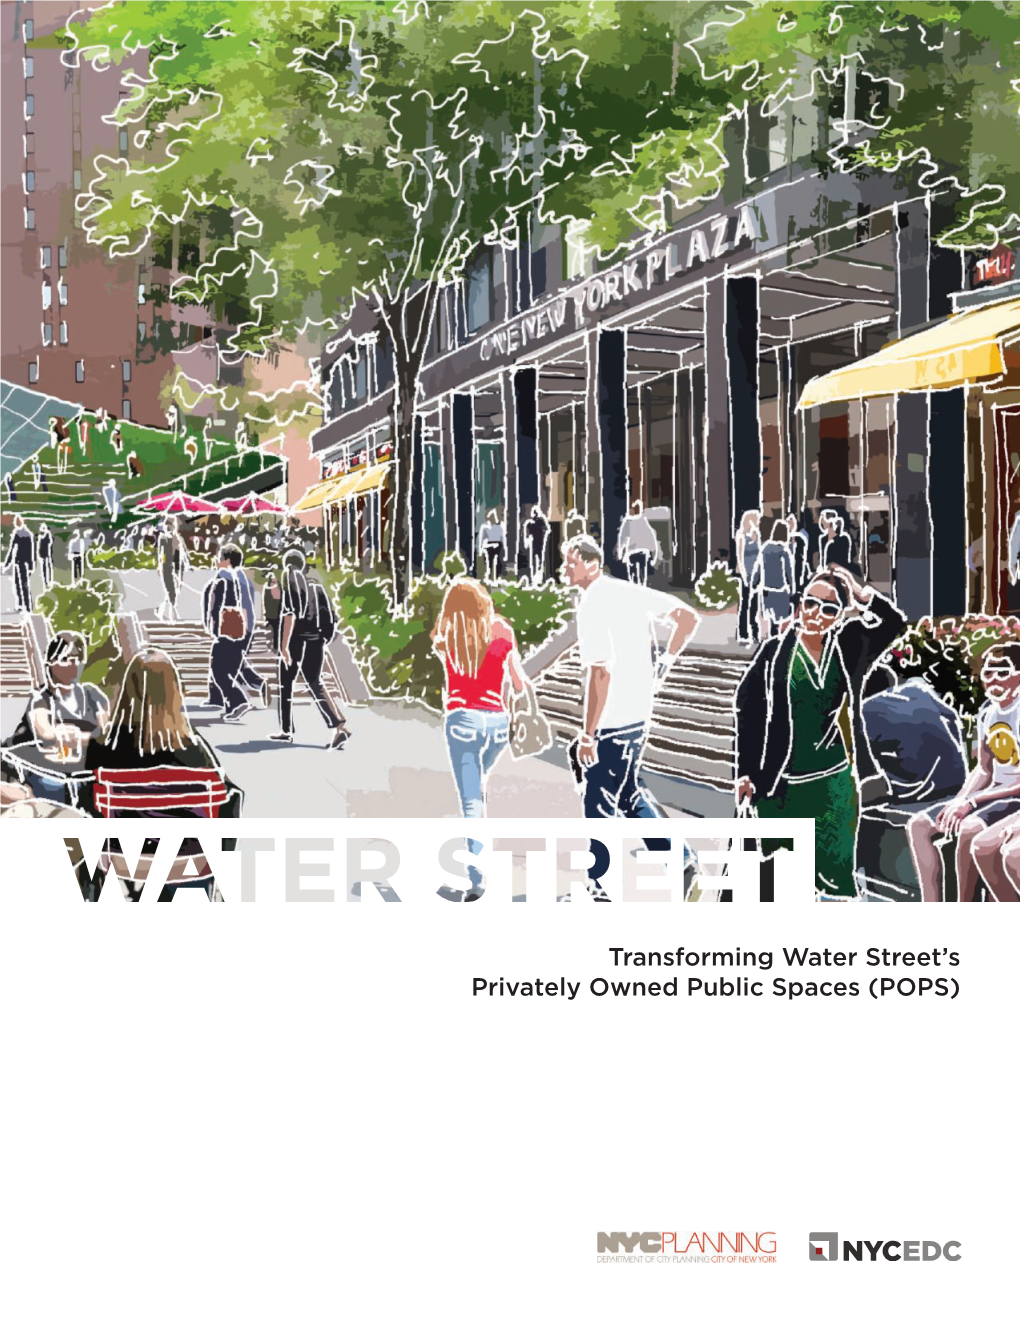 Transforming Water Street's Privately Owned Public Spaces (POPS)